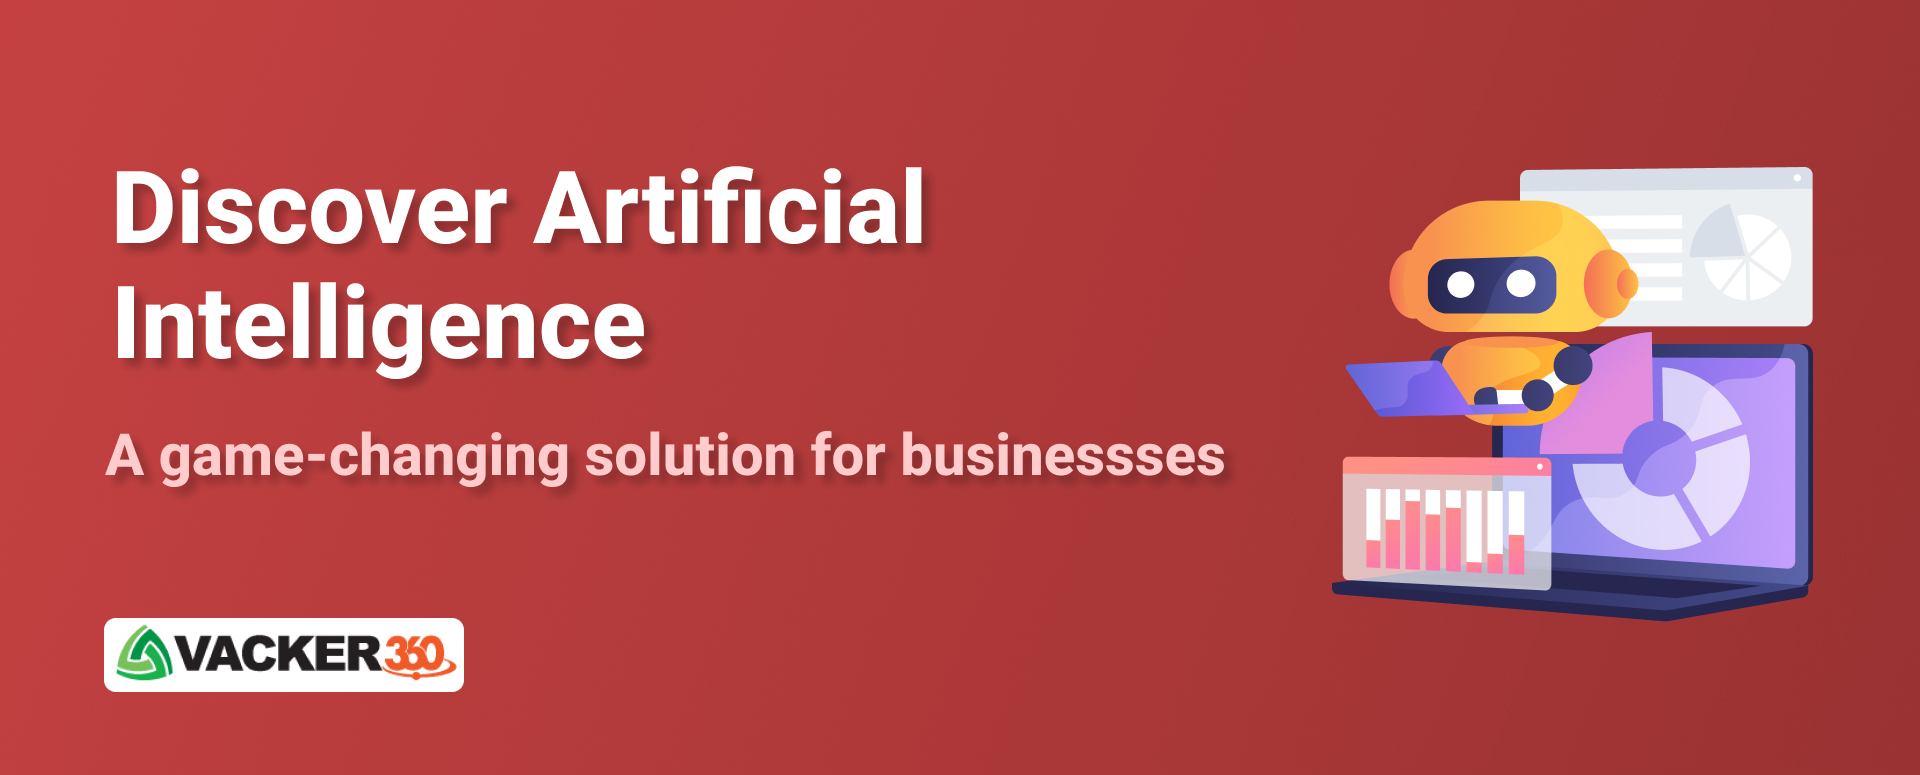 DISCOVER-ARTIFICIAL-INTELLIGENCE-A-GAME-CHANGING-SOLUTION-FOR-BUSINESSES